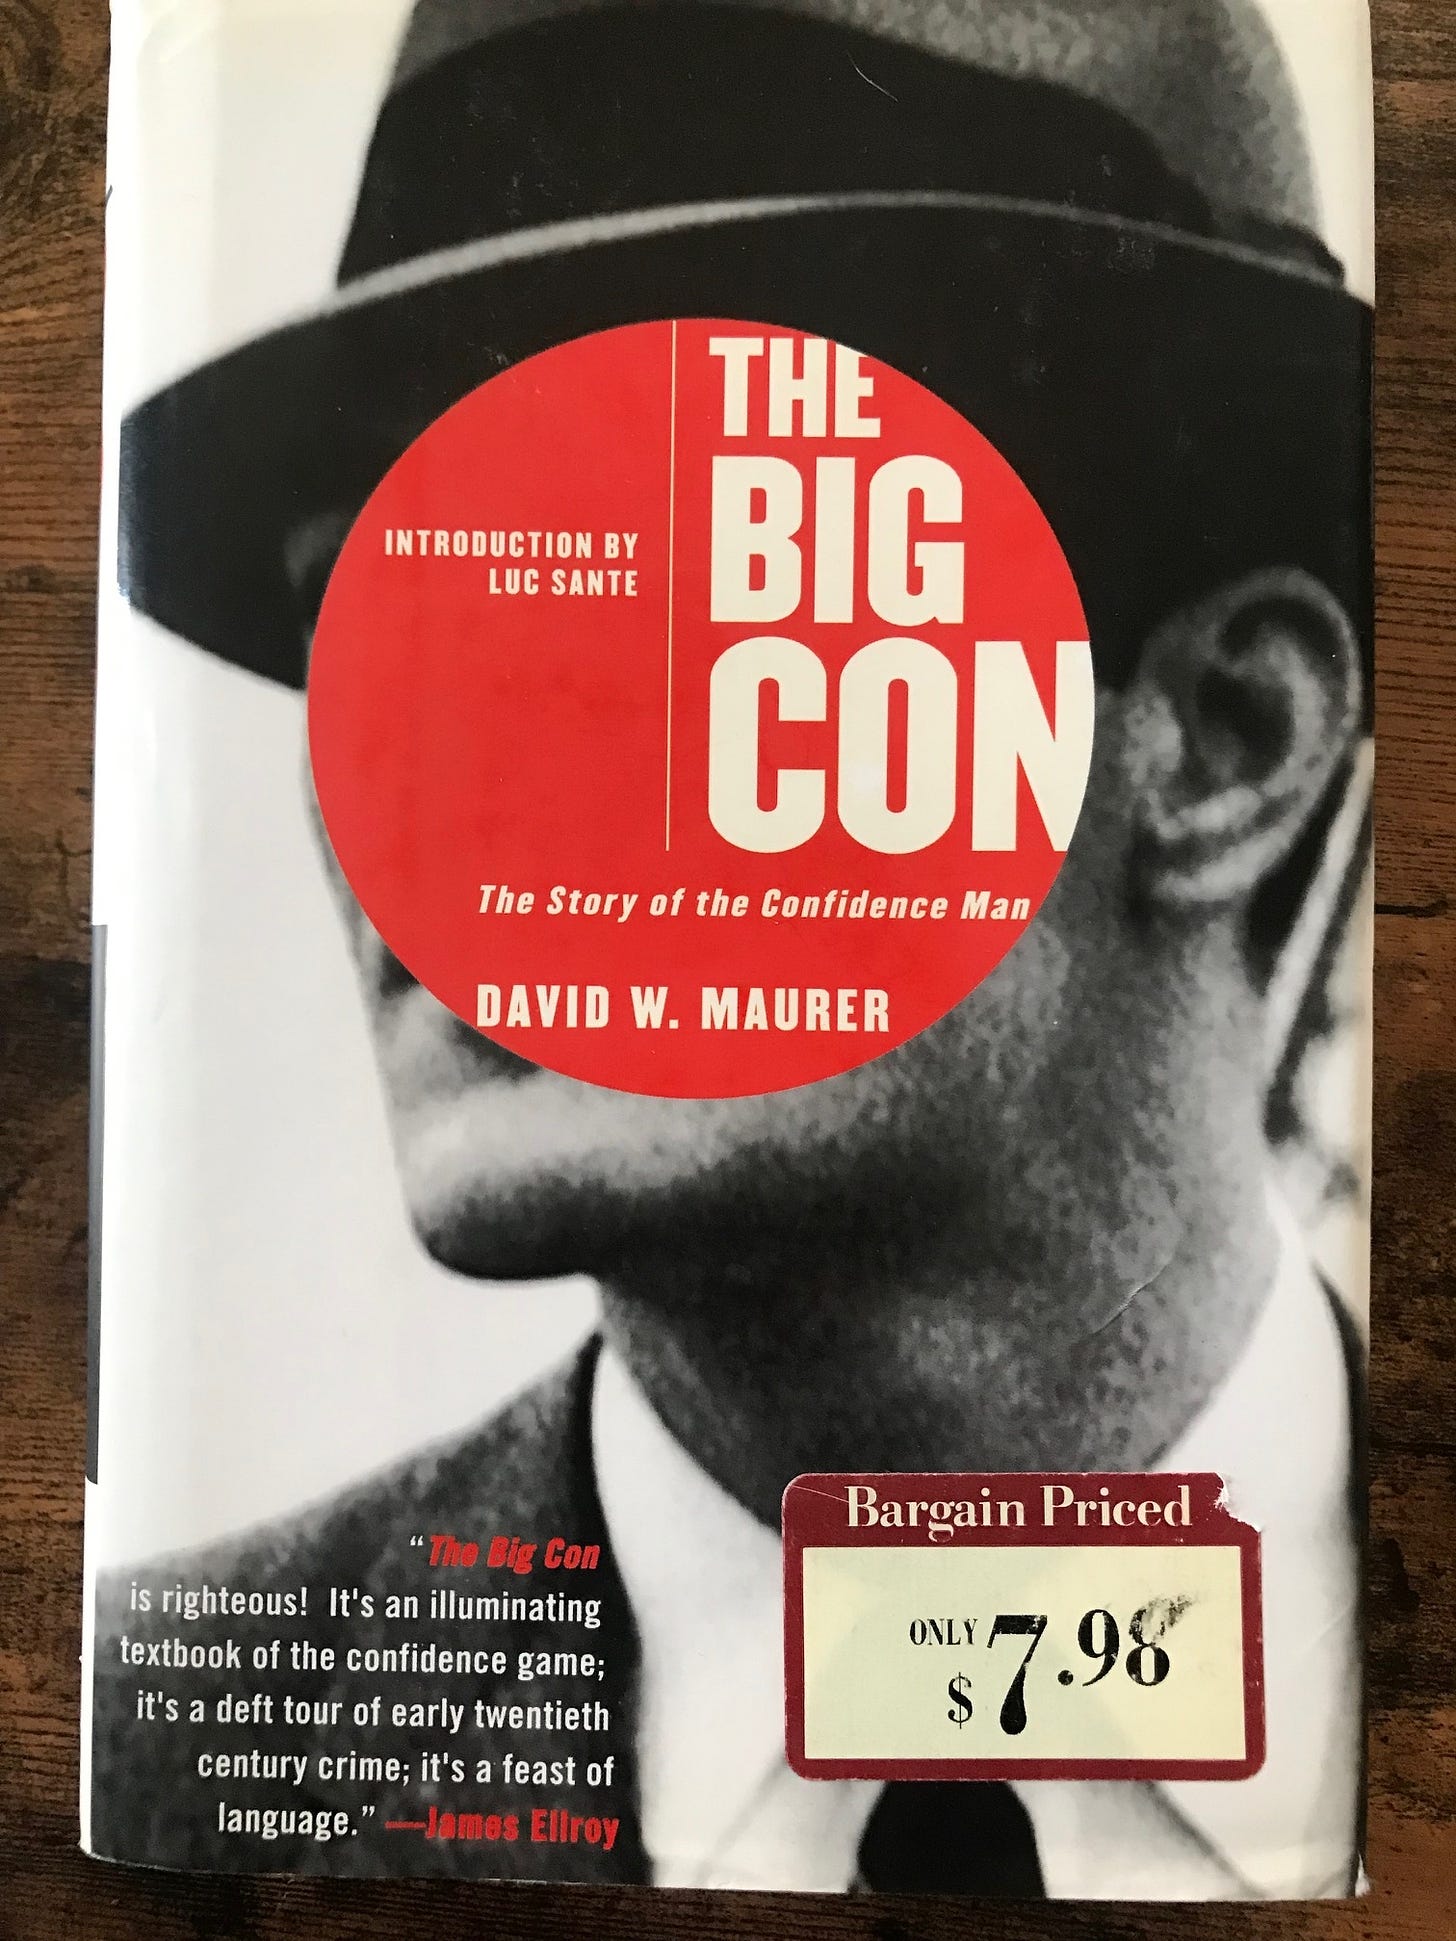 My dog-eared copy of the “The Big Con,” a book which helped establish our language for describing business fraud.